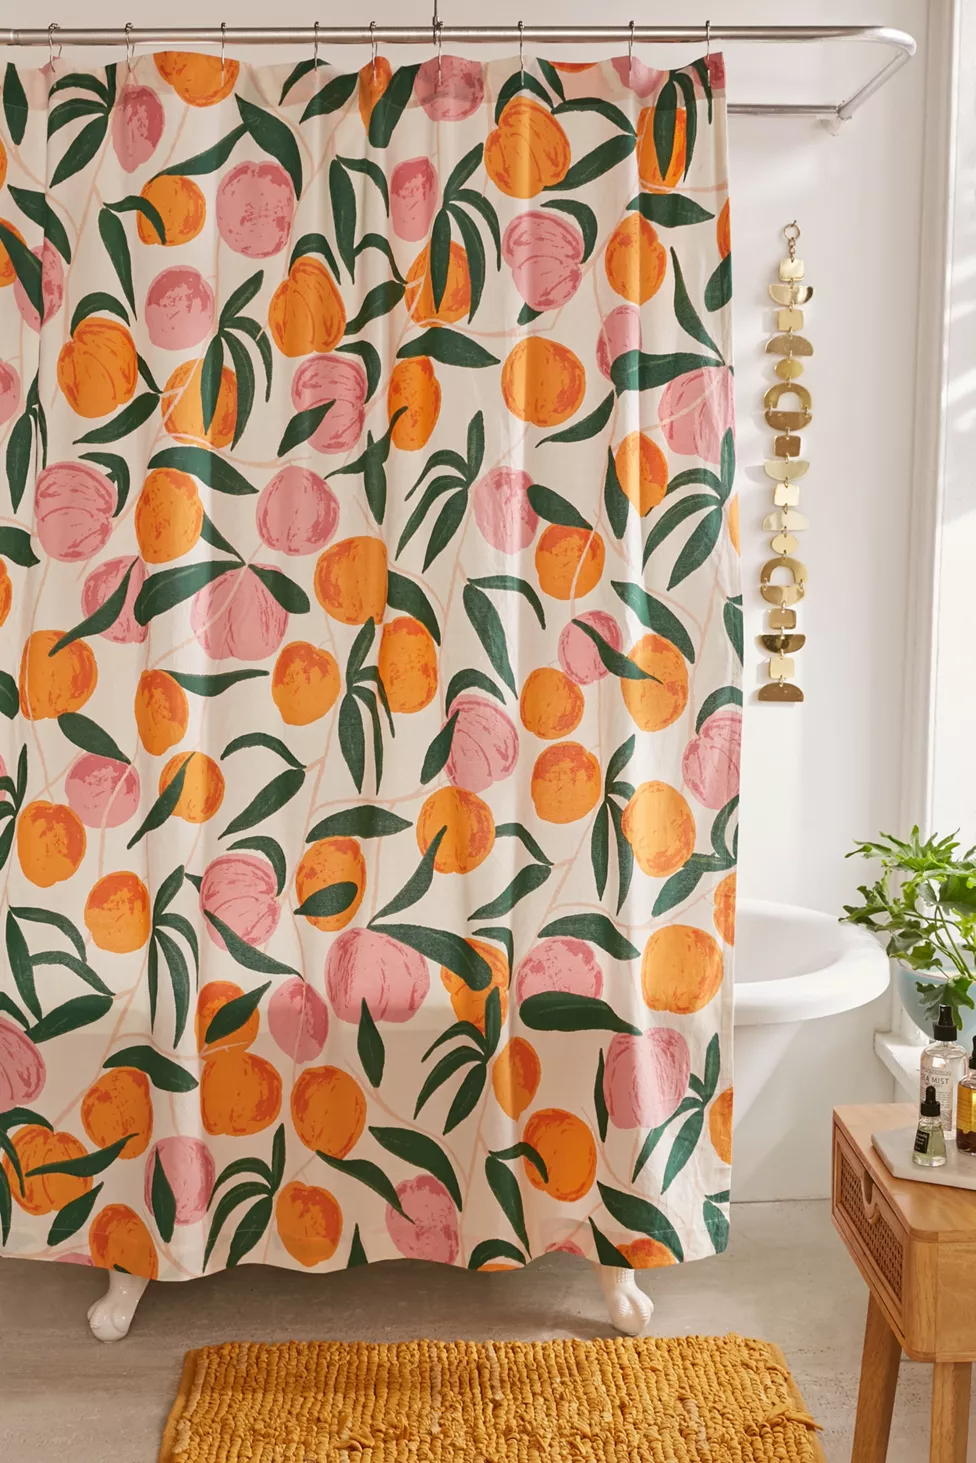 Shower Curtain Achieve Bathroom Privacy and Style with These Great Solutions for Your Shower Area